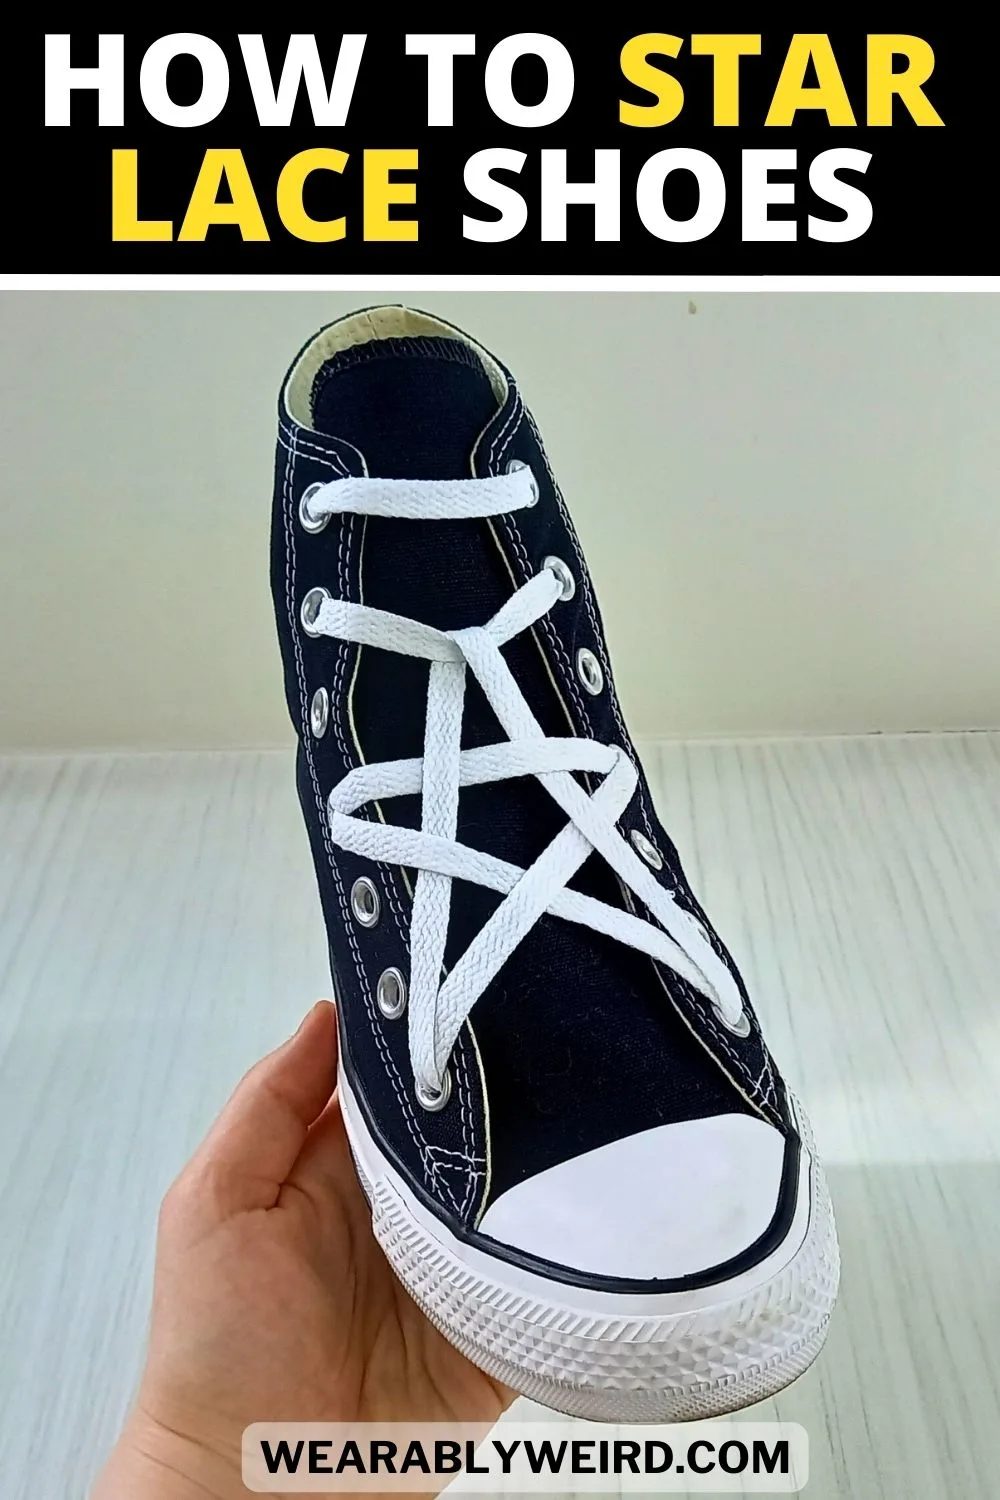 How To Star Lace Shoes